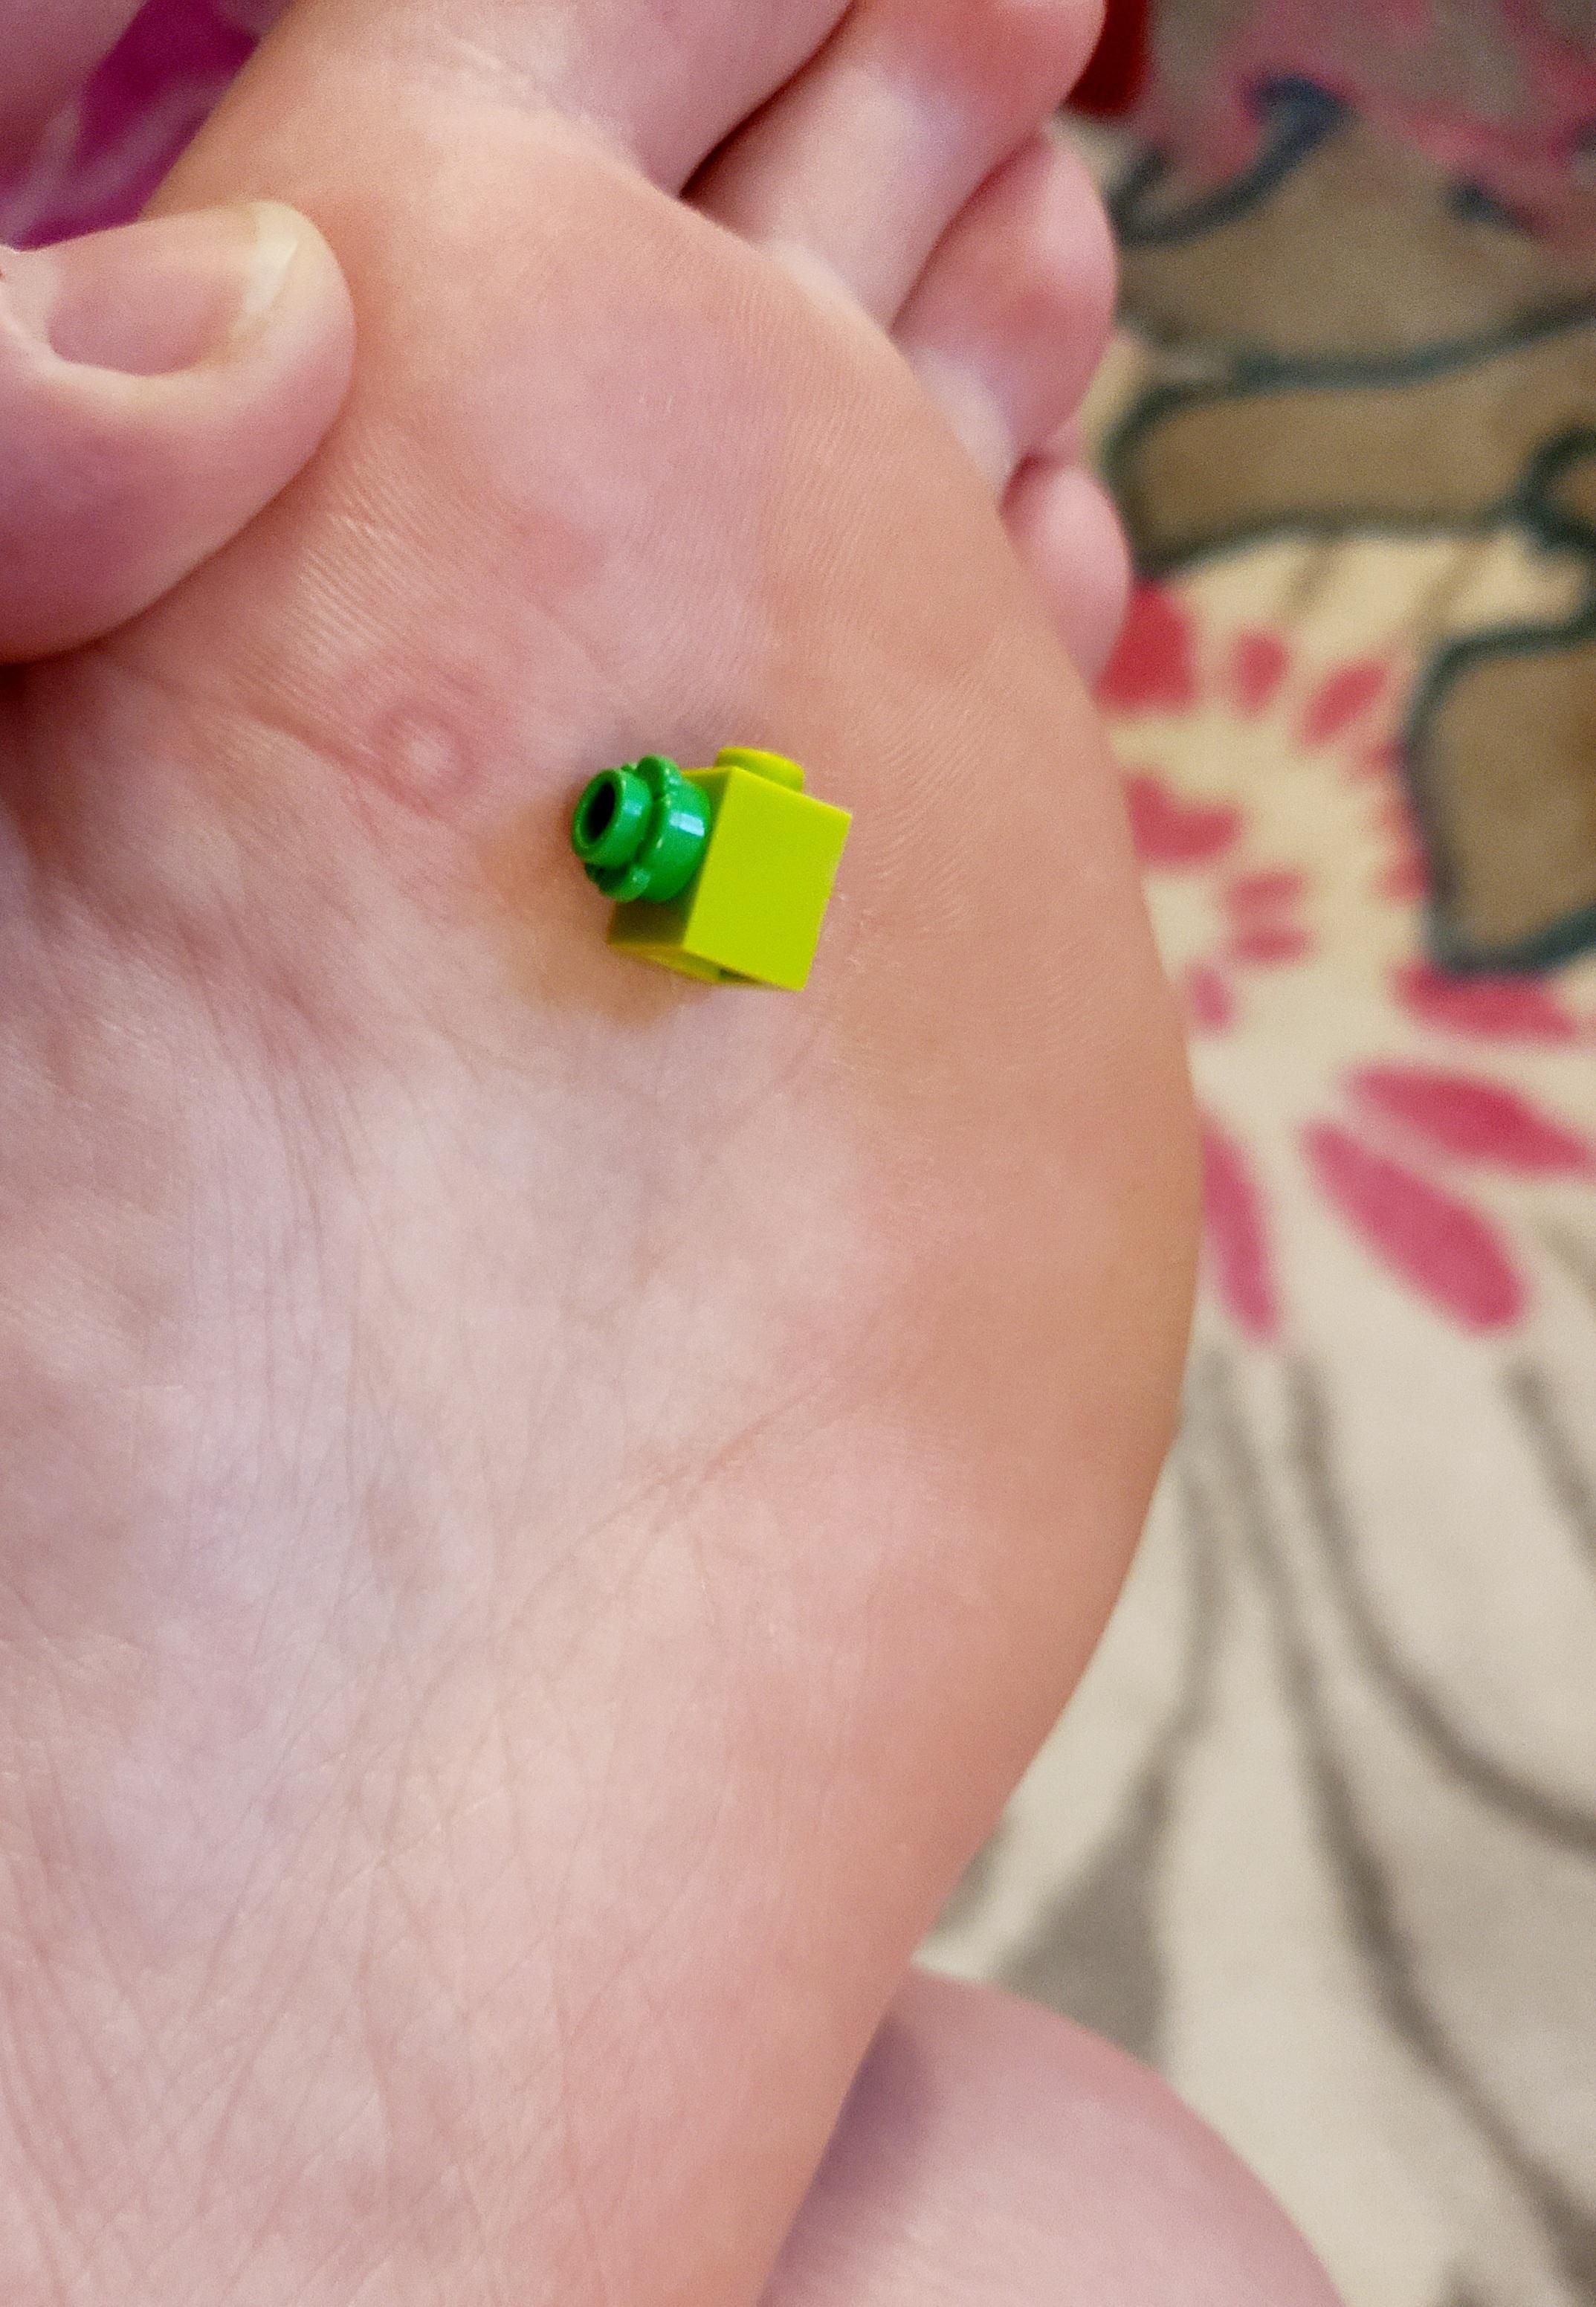 A mom for 4 years, and I am a parent officially today. I stepped on my first Lego!